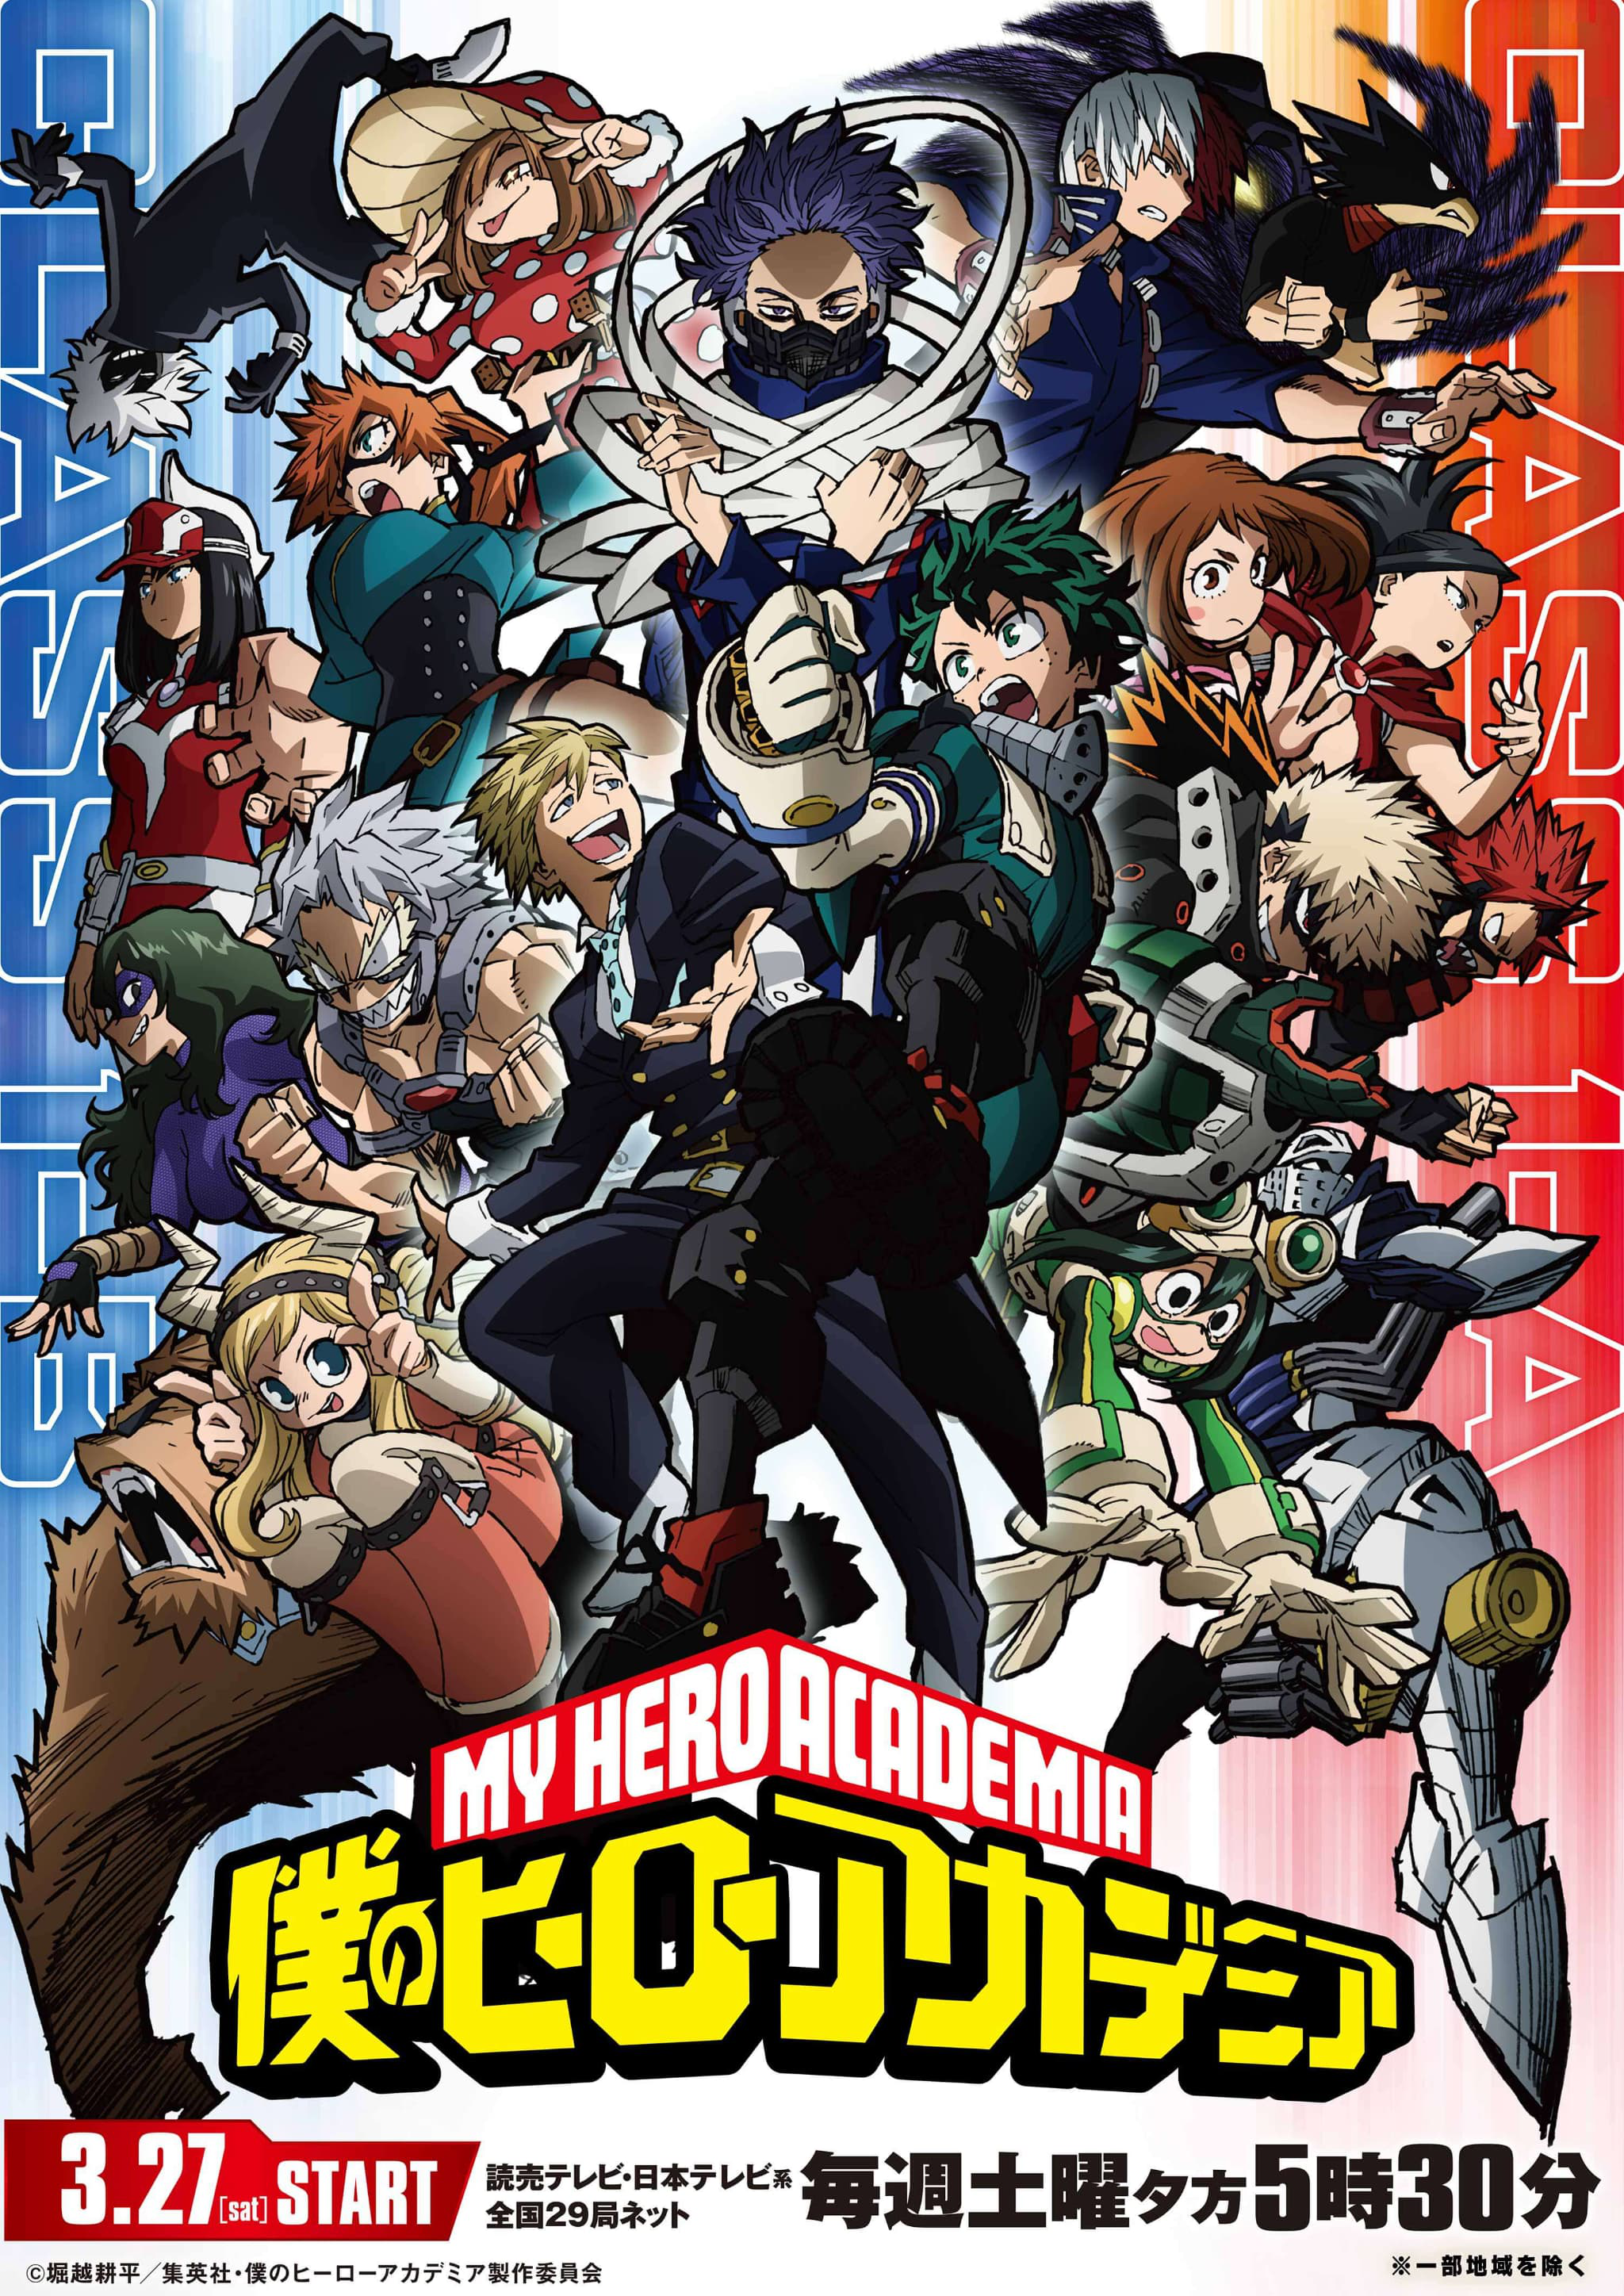 My Hero Academia chapter 376 delay and potential release date explained